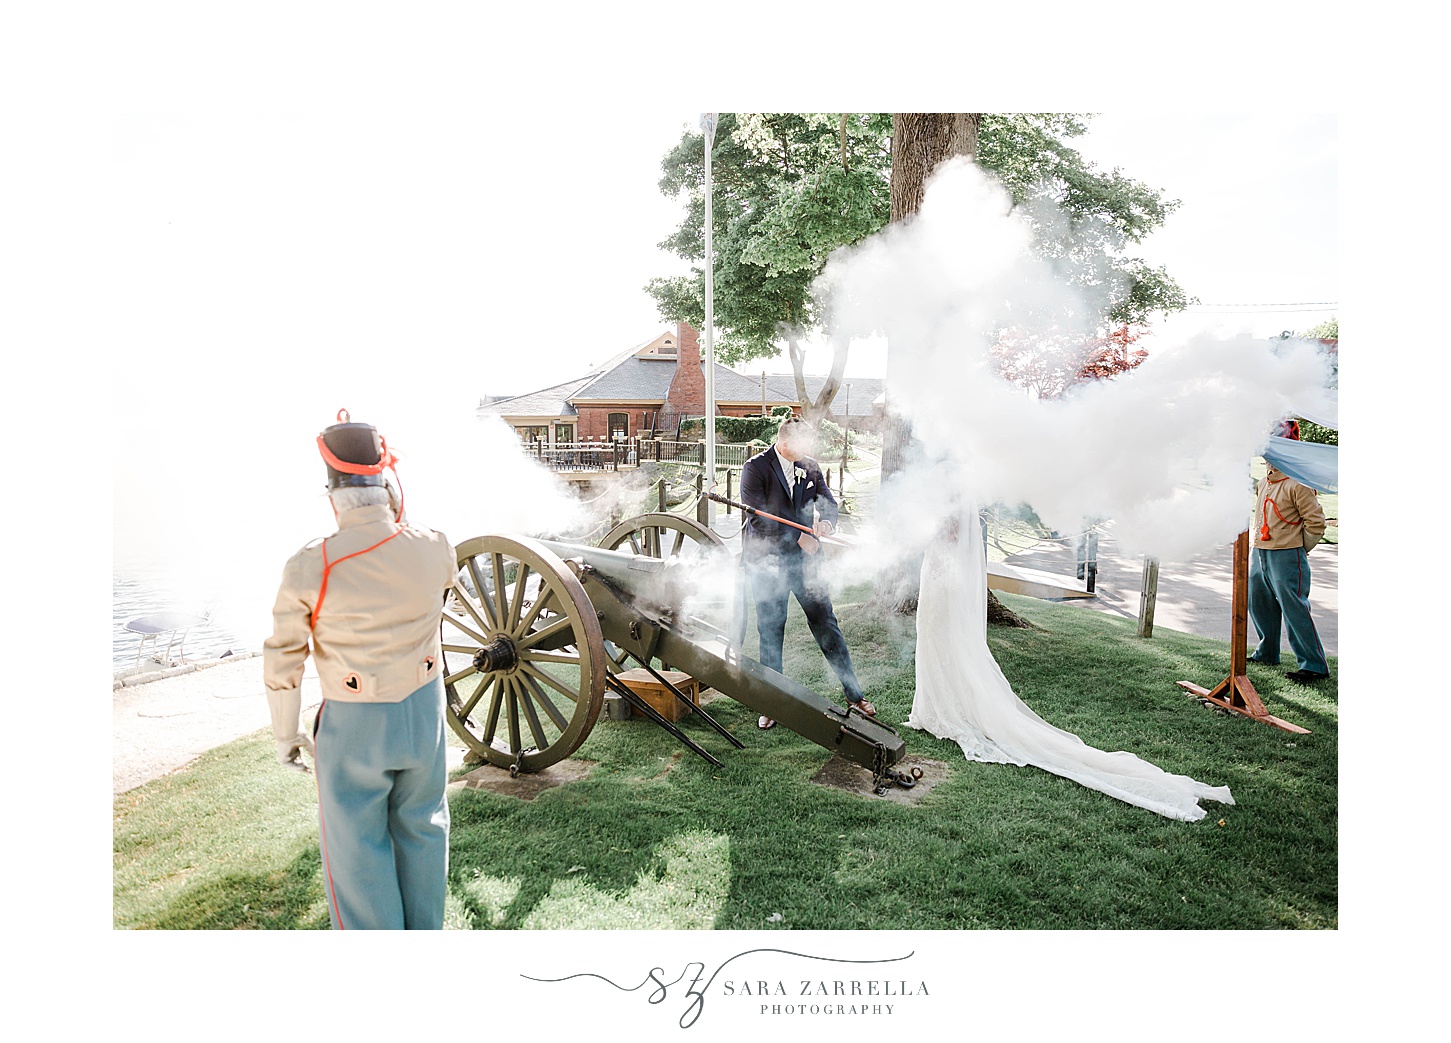 cannon fires during wedding ceremony at Squantum Association